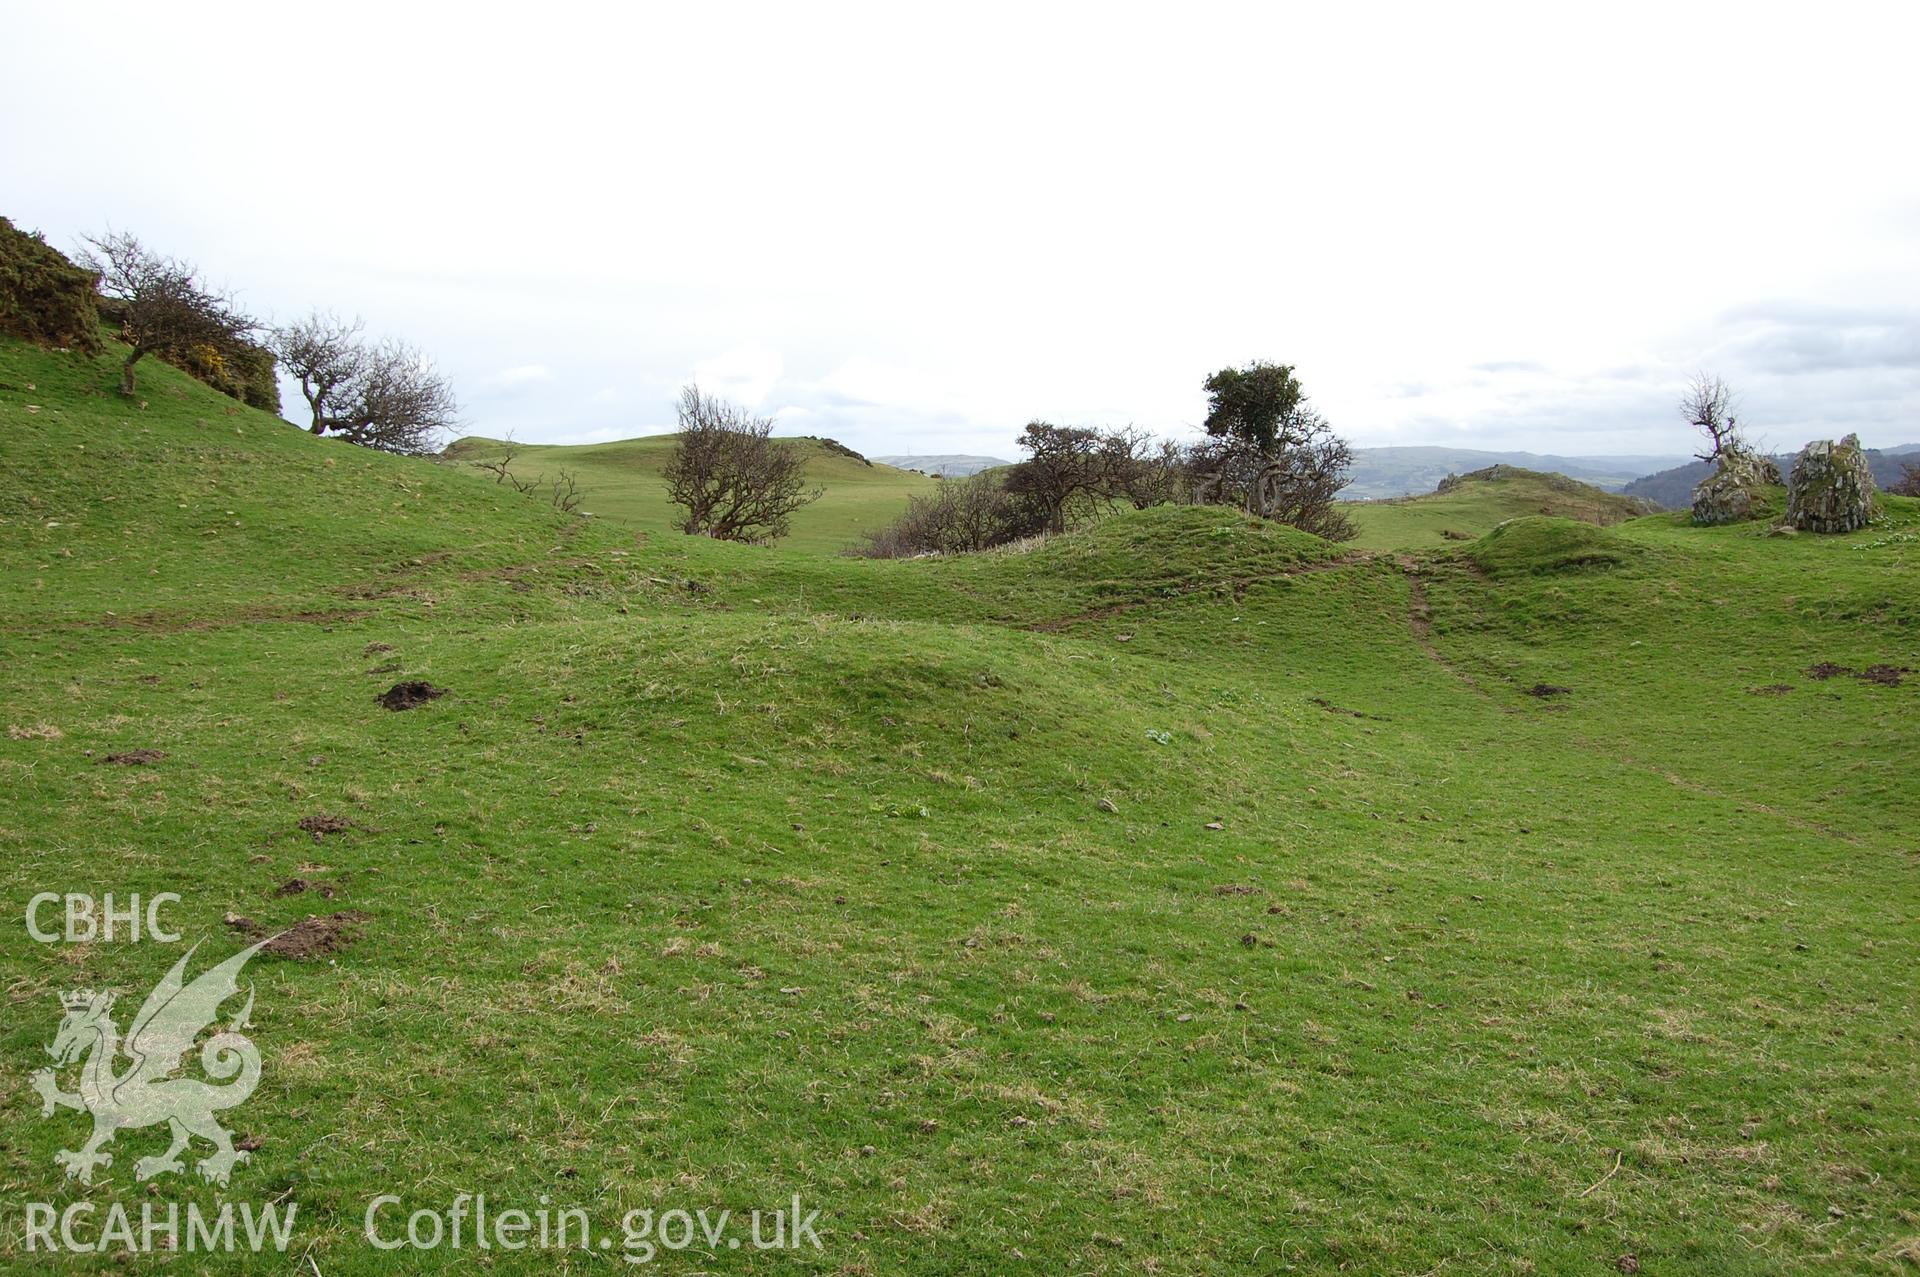 Digital photograph from an archaeological assessment of Deganwy Castle, carried out by Gwynedd Archaeological Trust, 2009. Earthworks forming part of South gate.